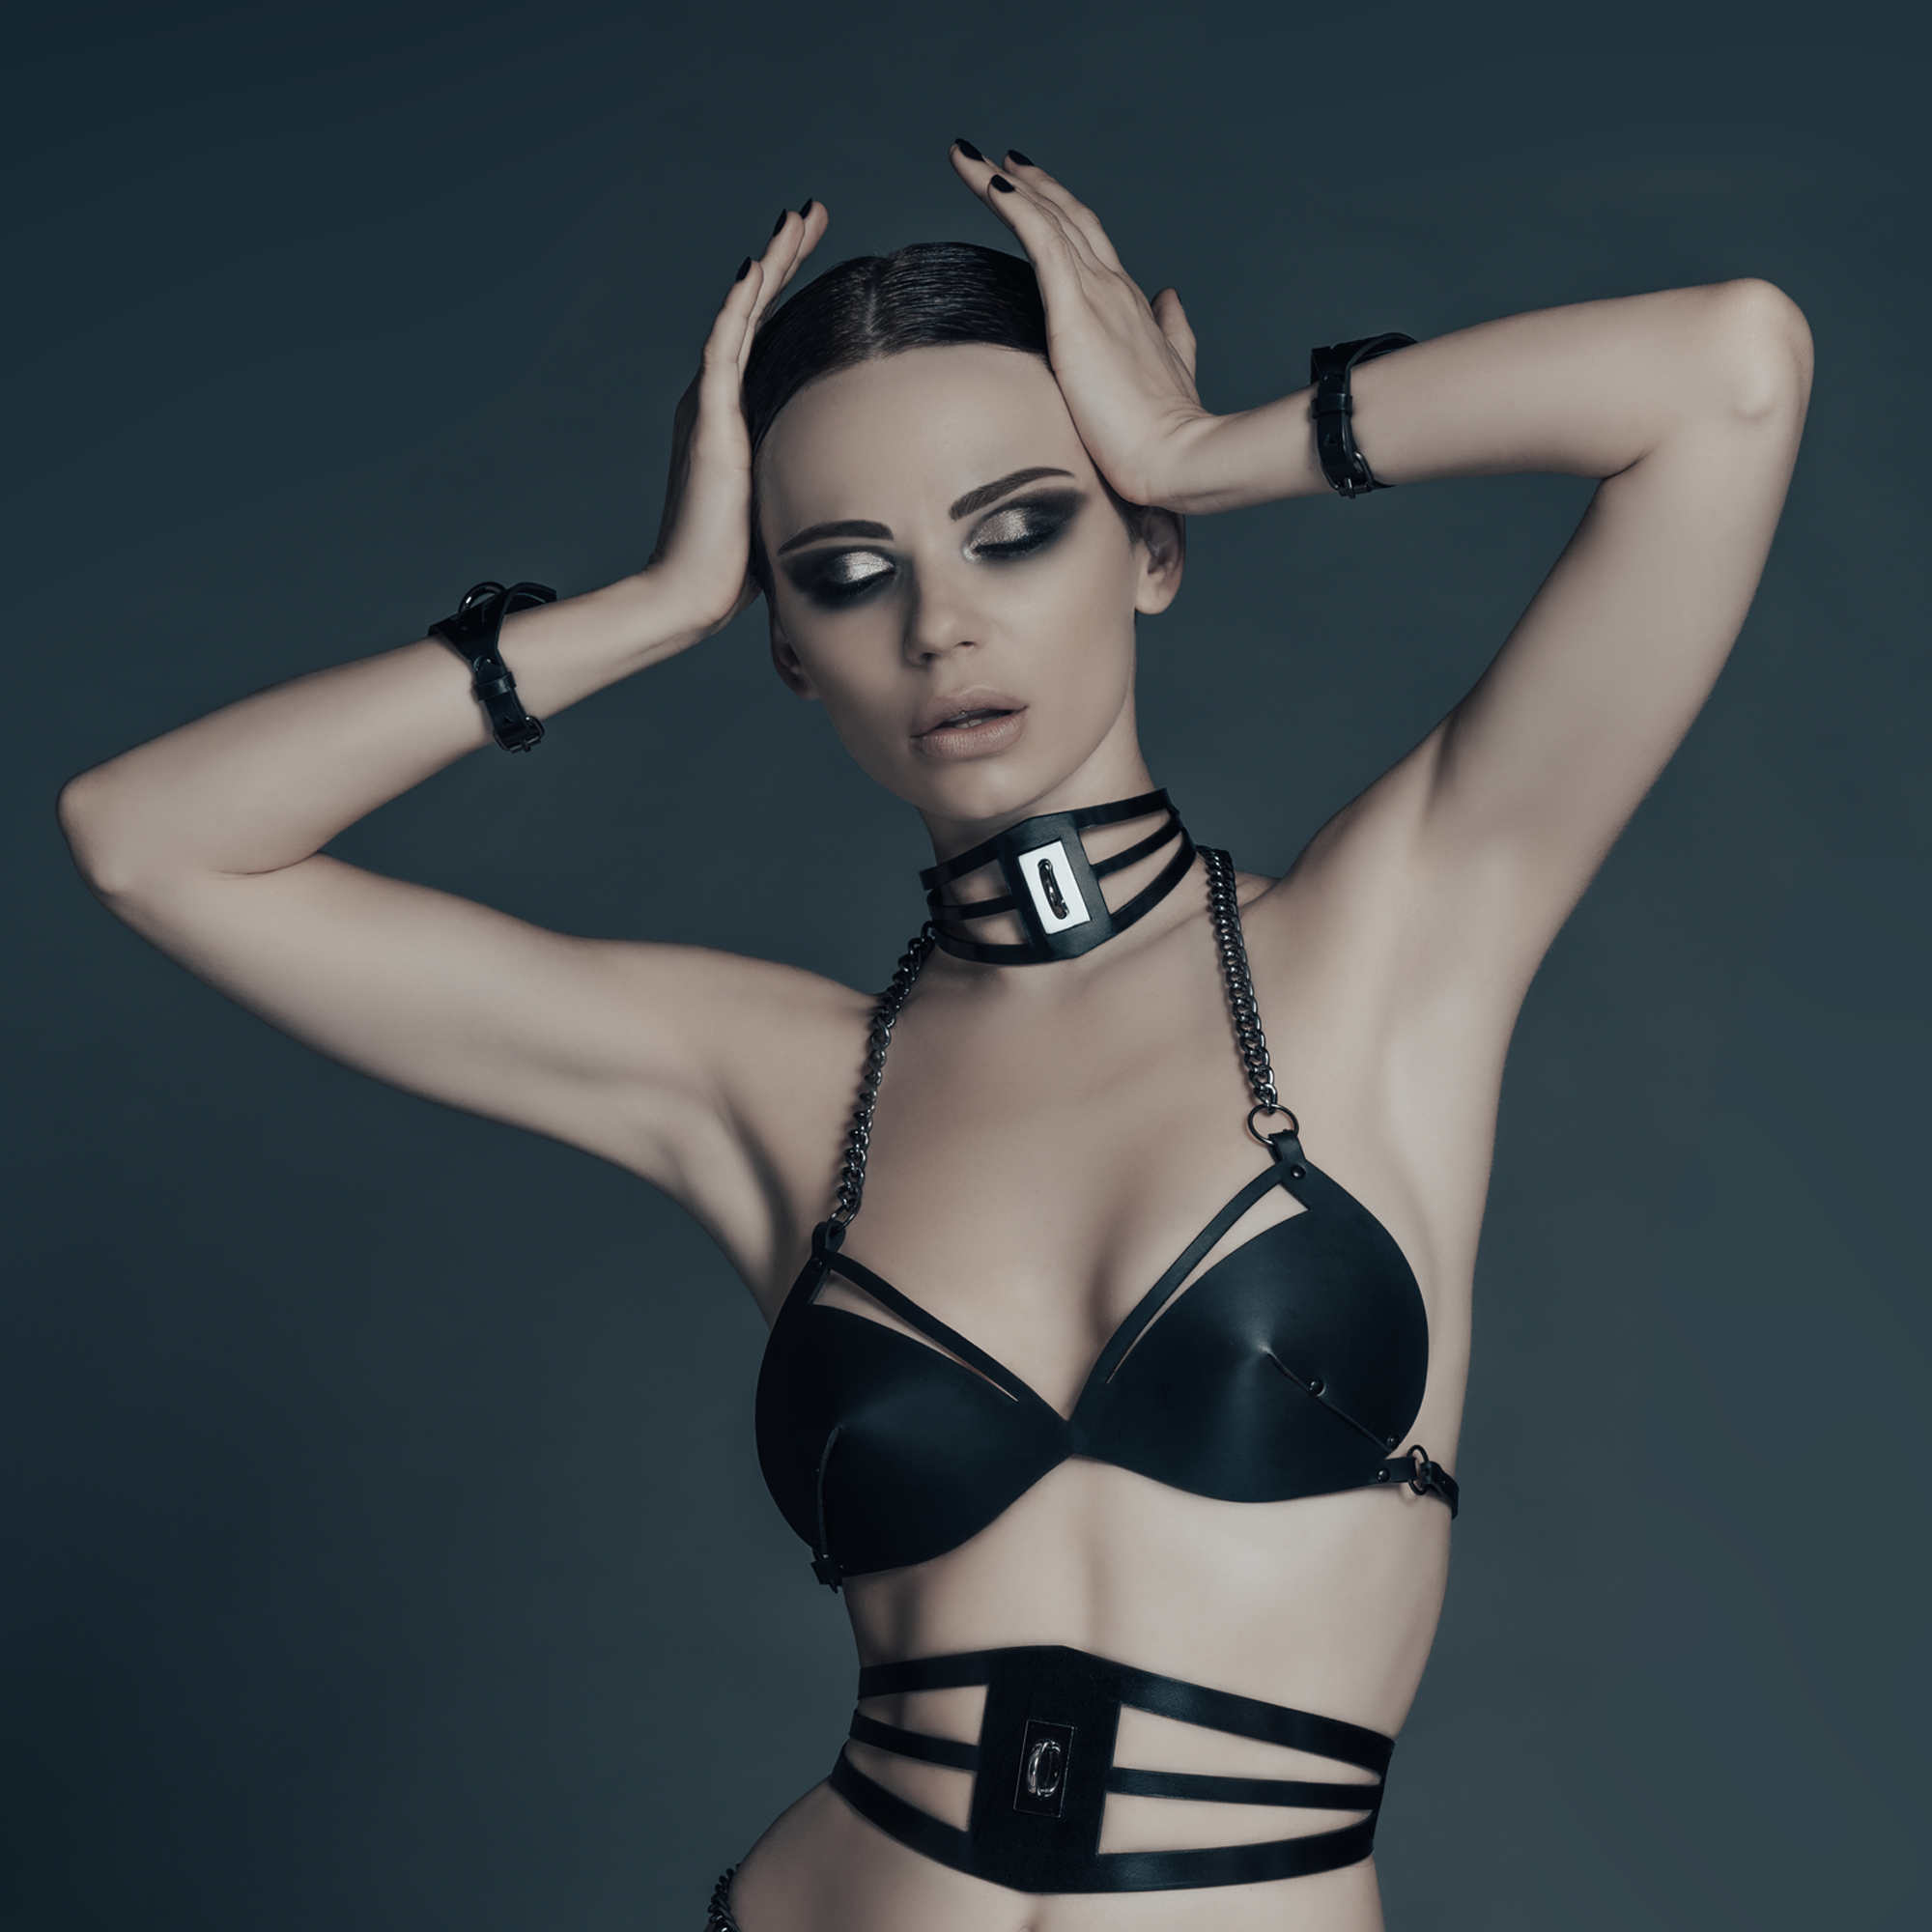 German lingerie, harness lingerie, bras and chokers